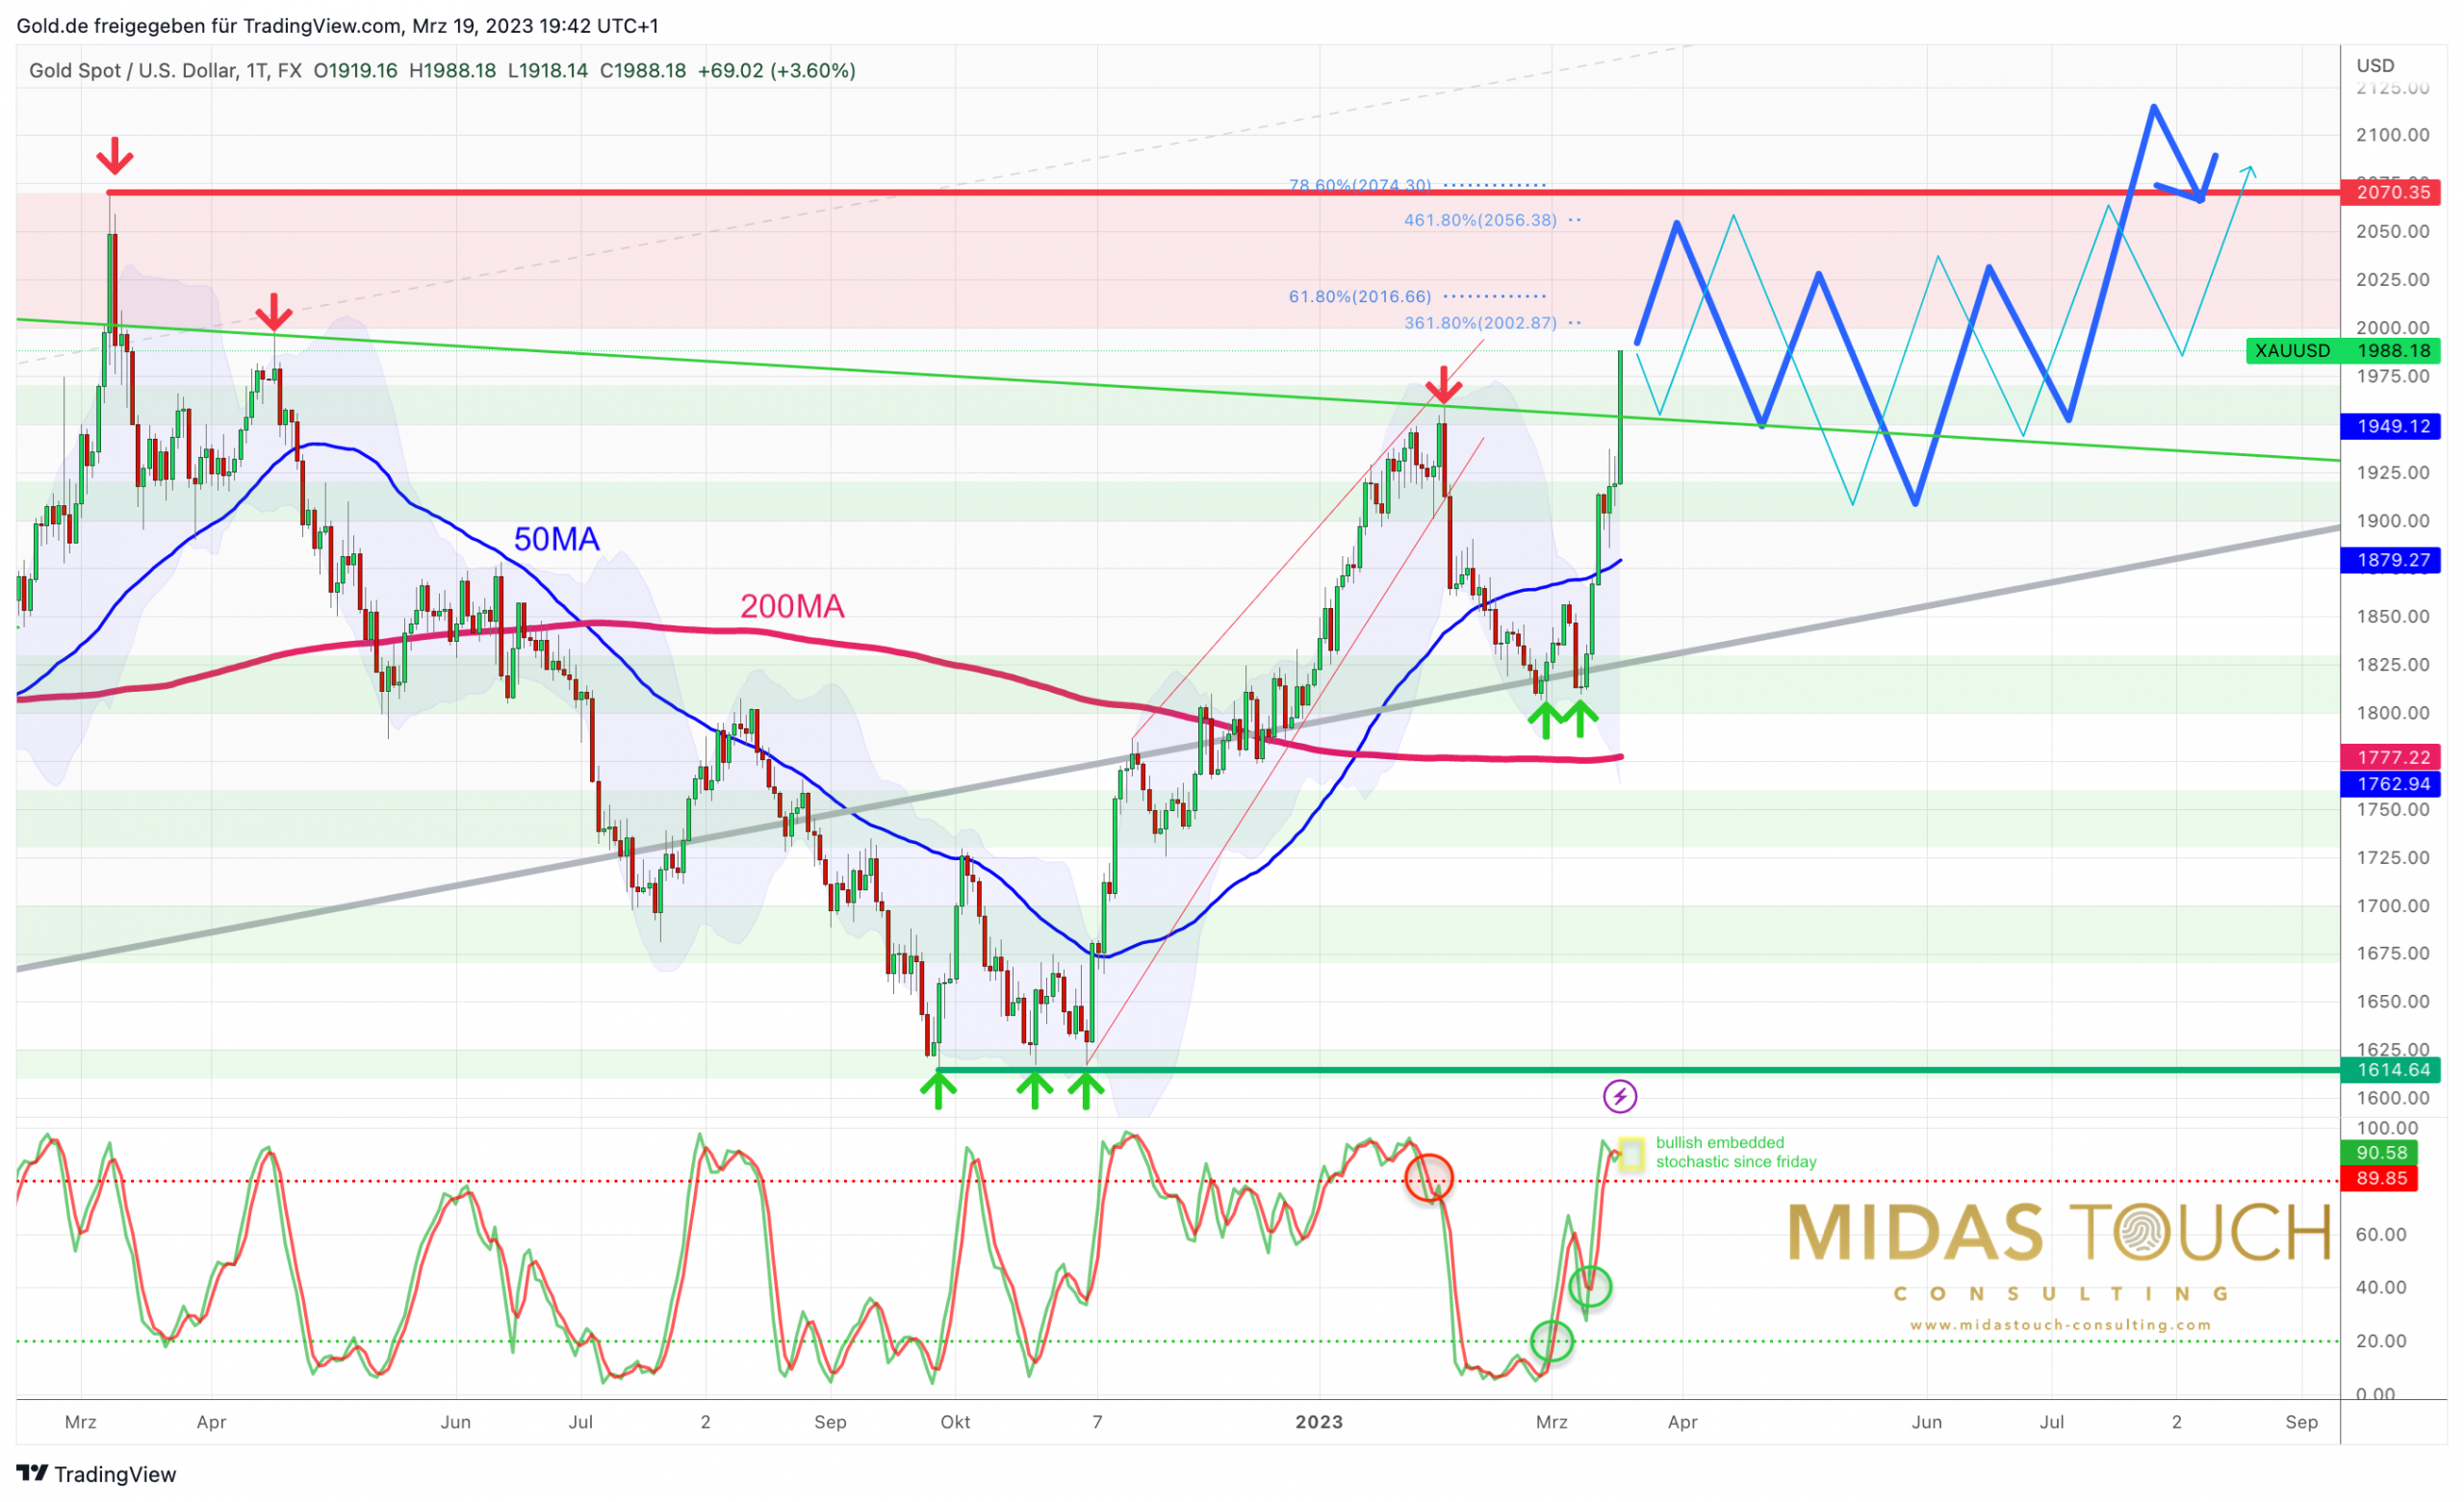 Gold in US-Dollar, daily chart as of March 19th, 2023. ©Midas Touch Consulting